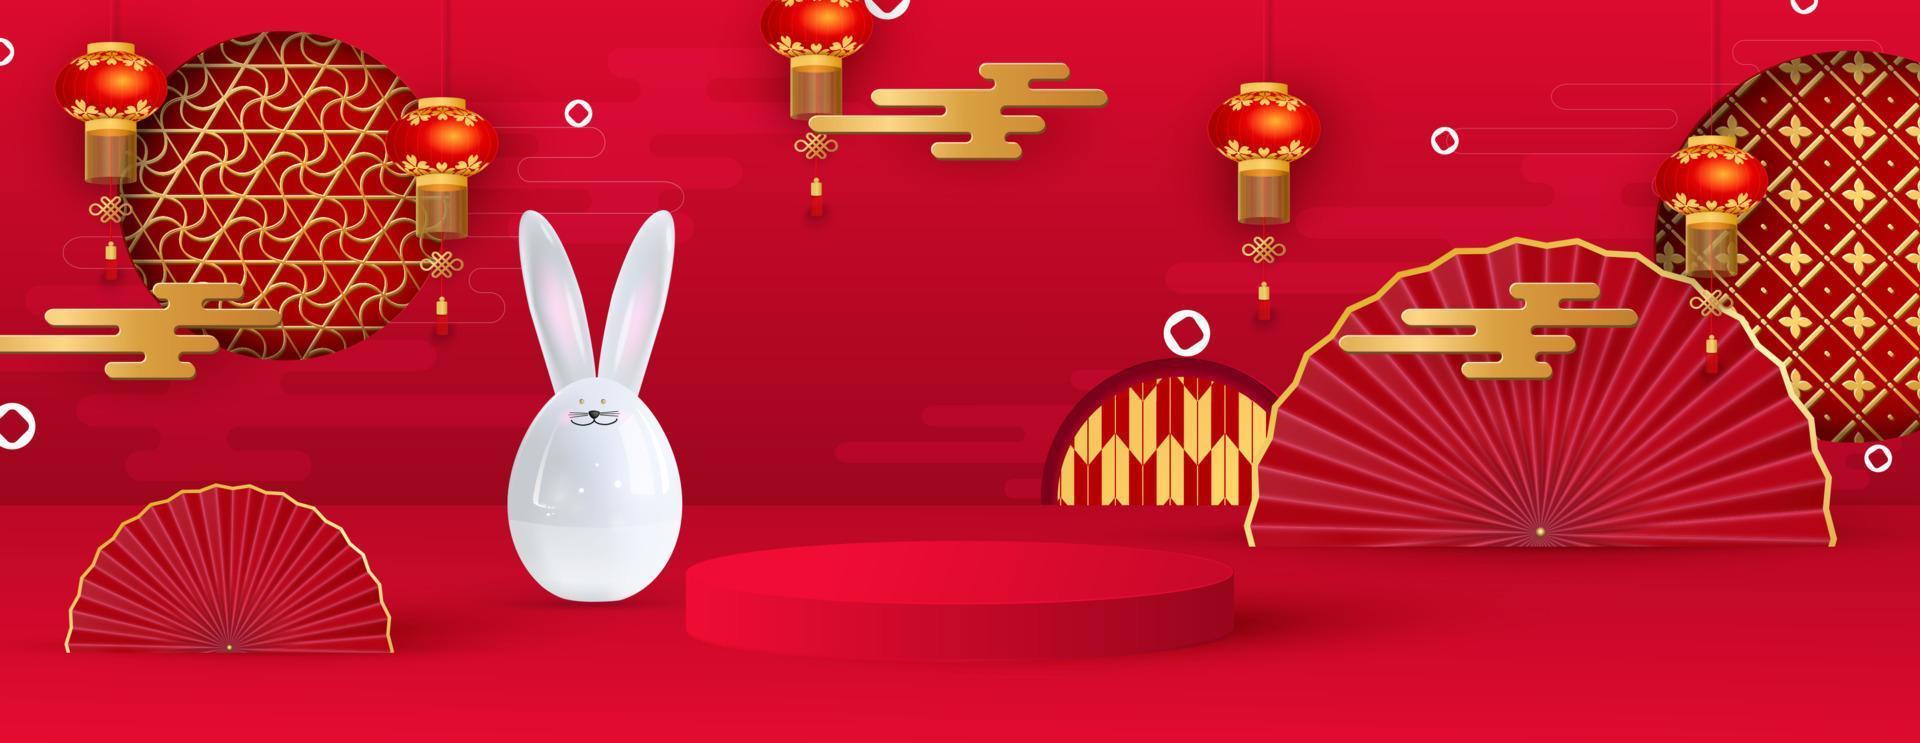 Platform and podium for presentations. Festive Christmas background, ceramic hare, hanging lanterns, fans, traditional patterns. Happy new year of the rabbit. Vector illustration